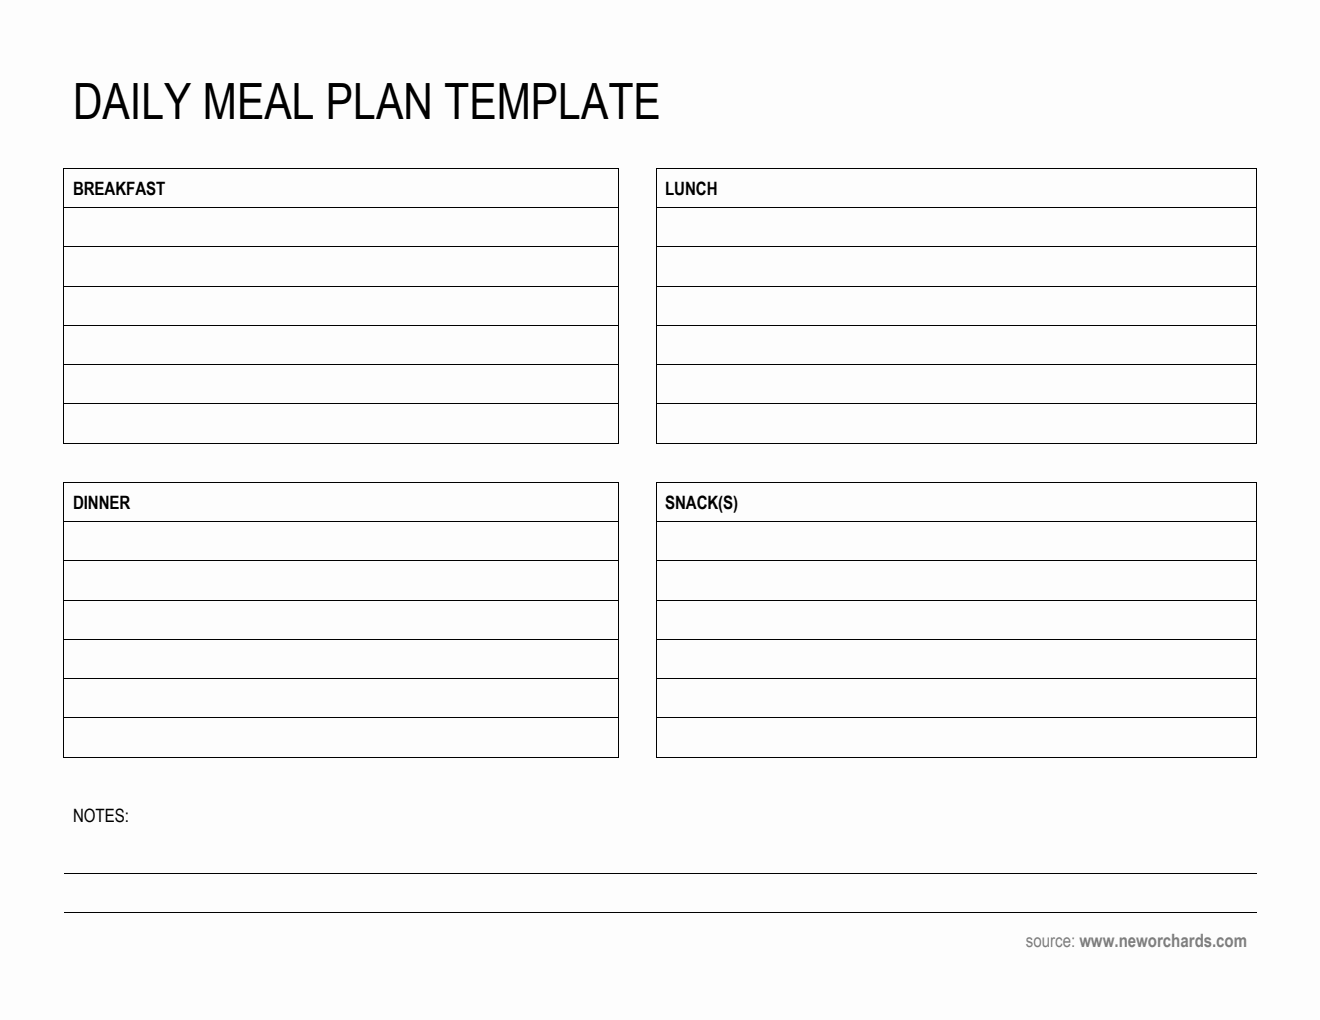 Printable Daily Meal Plan Template in Word